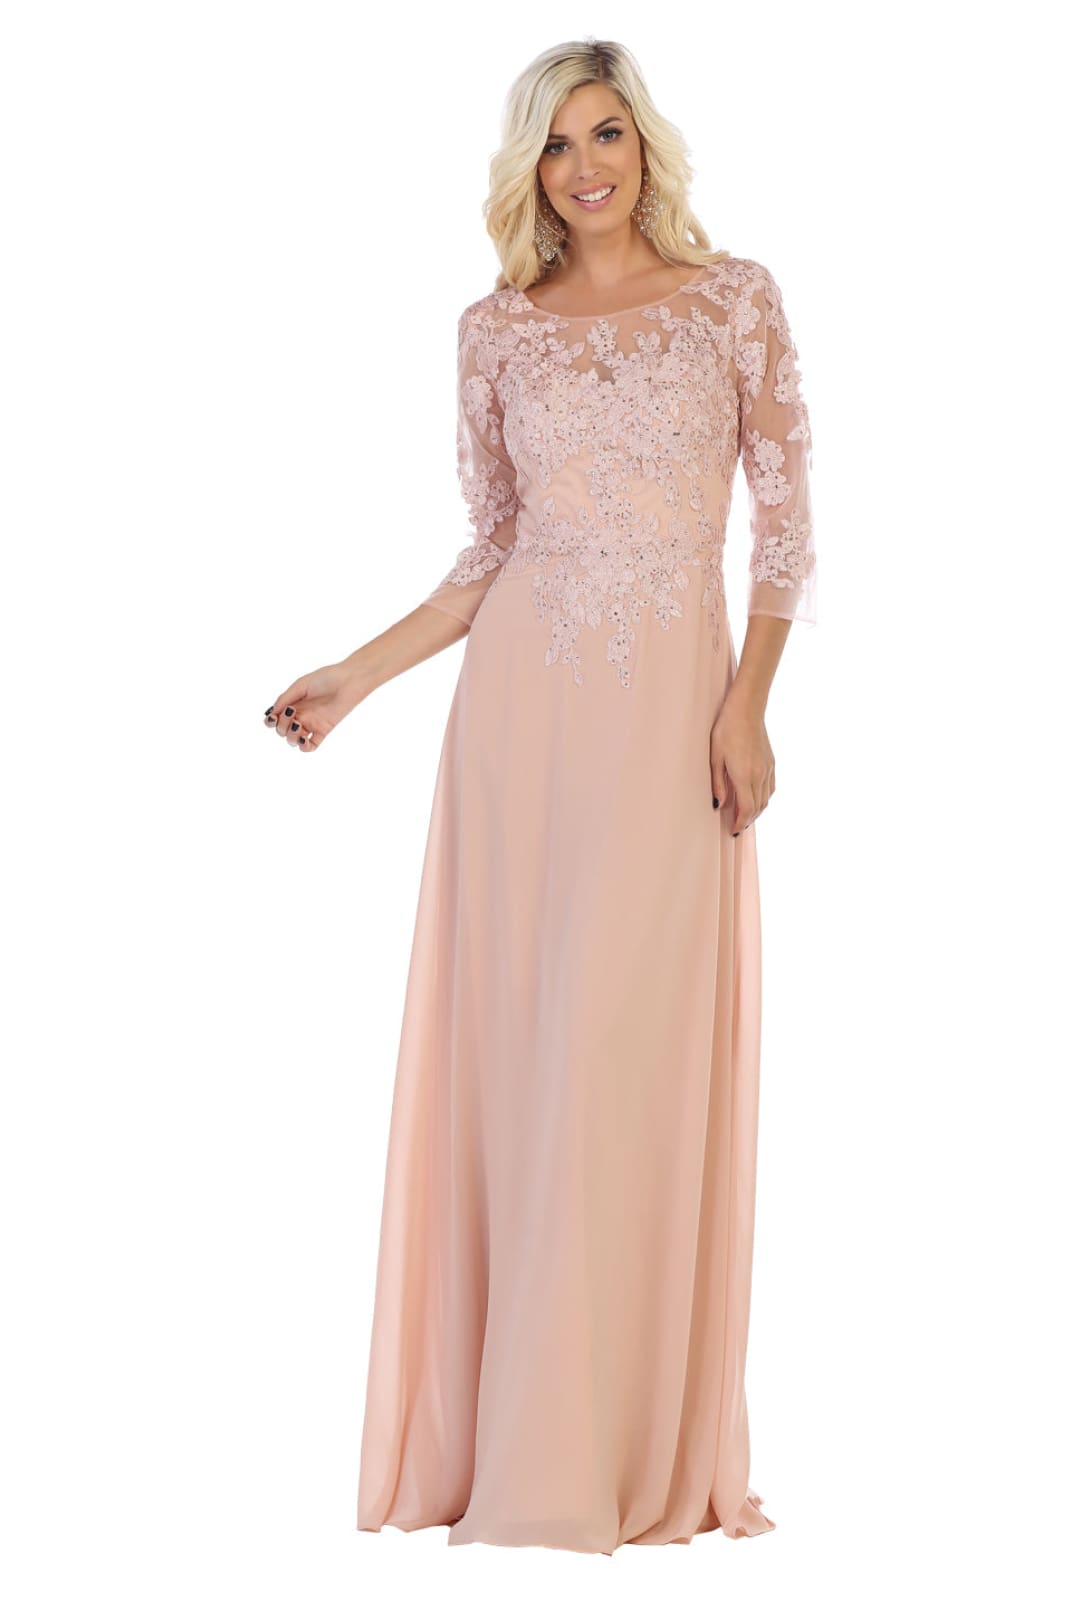 May Queen MQ1637 3/4 Sleeves Plus Size Mother Of The Bride Dress - DUSTY ROSE / L - Dress